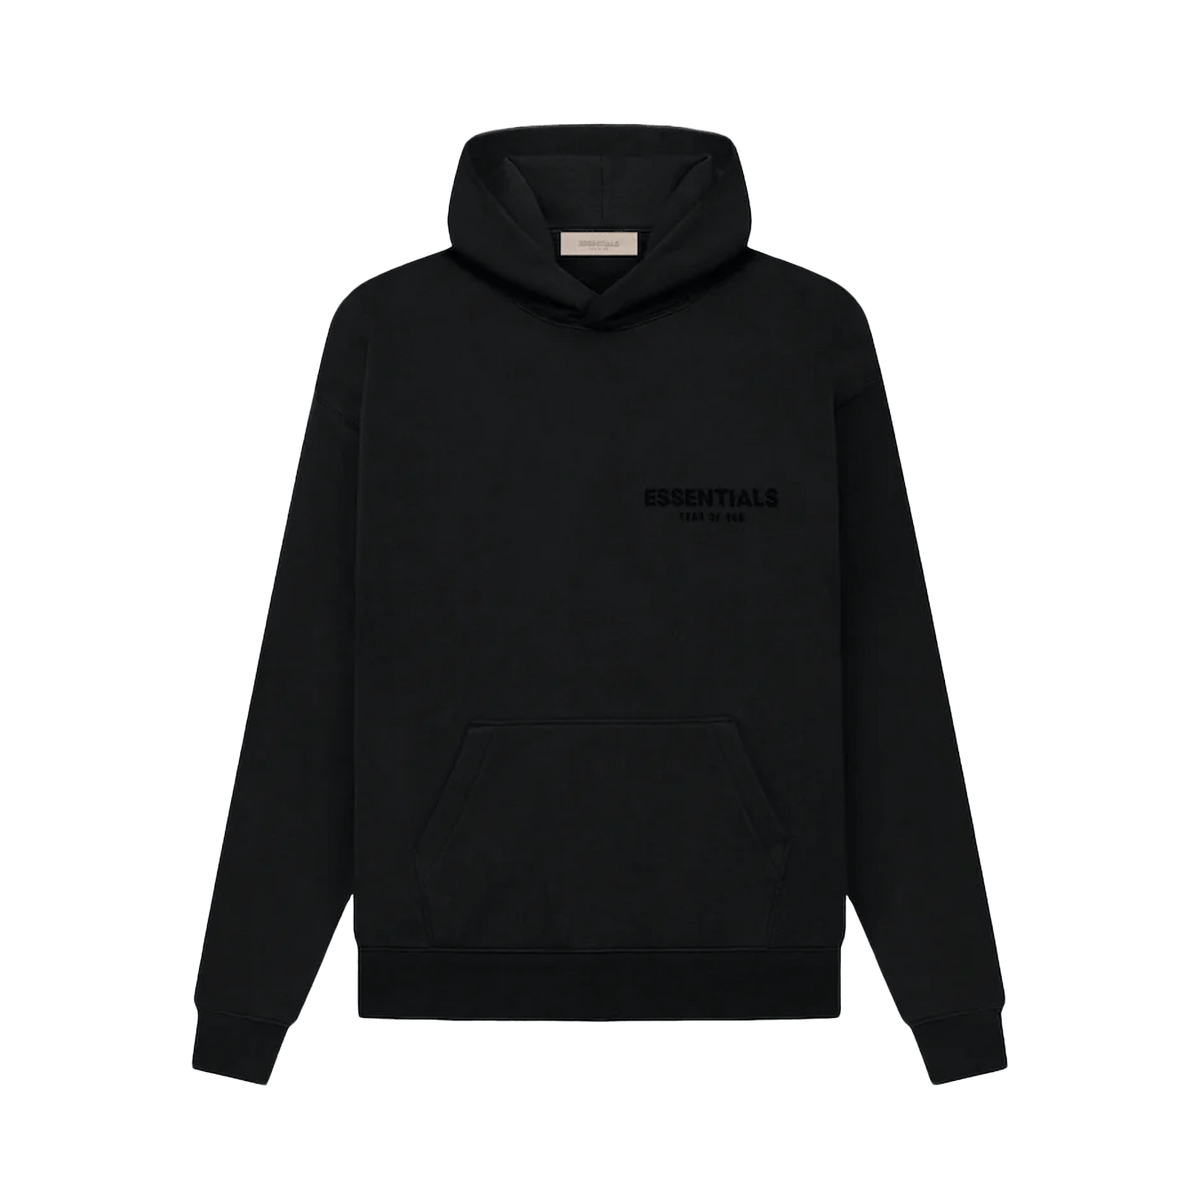 Fear of God Essentials nsw Hoodie 'Stretch Limo' (SS22) - CerbeShops